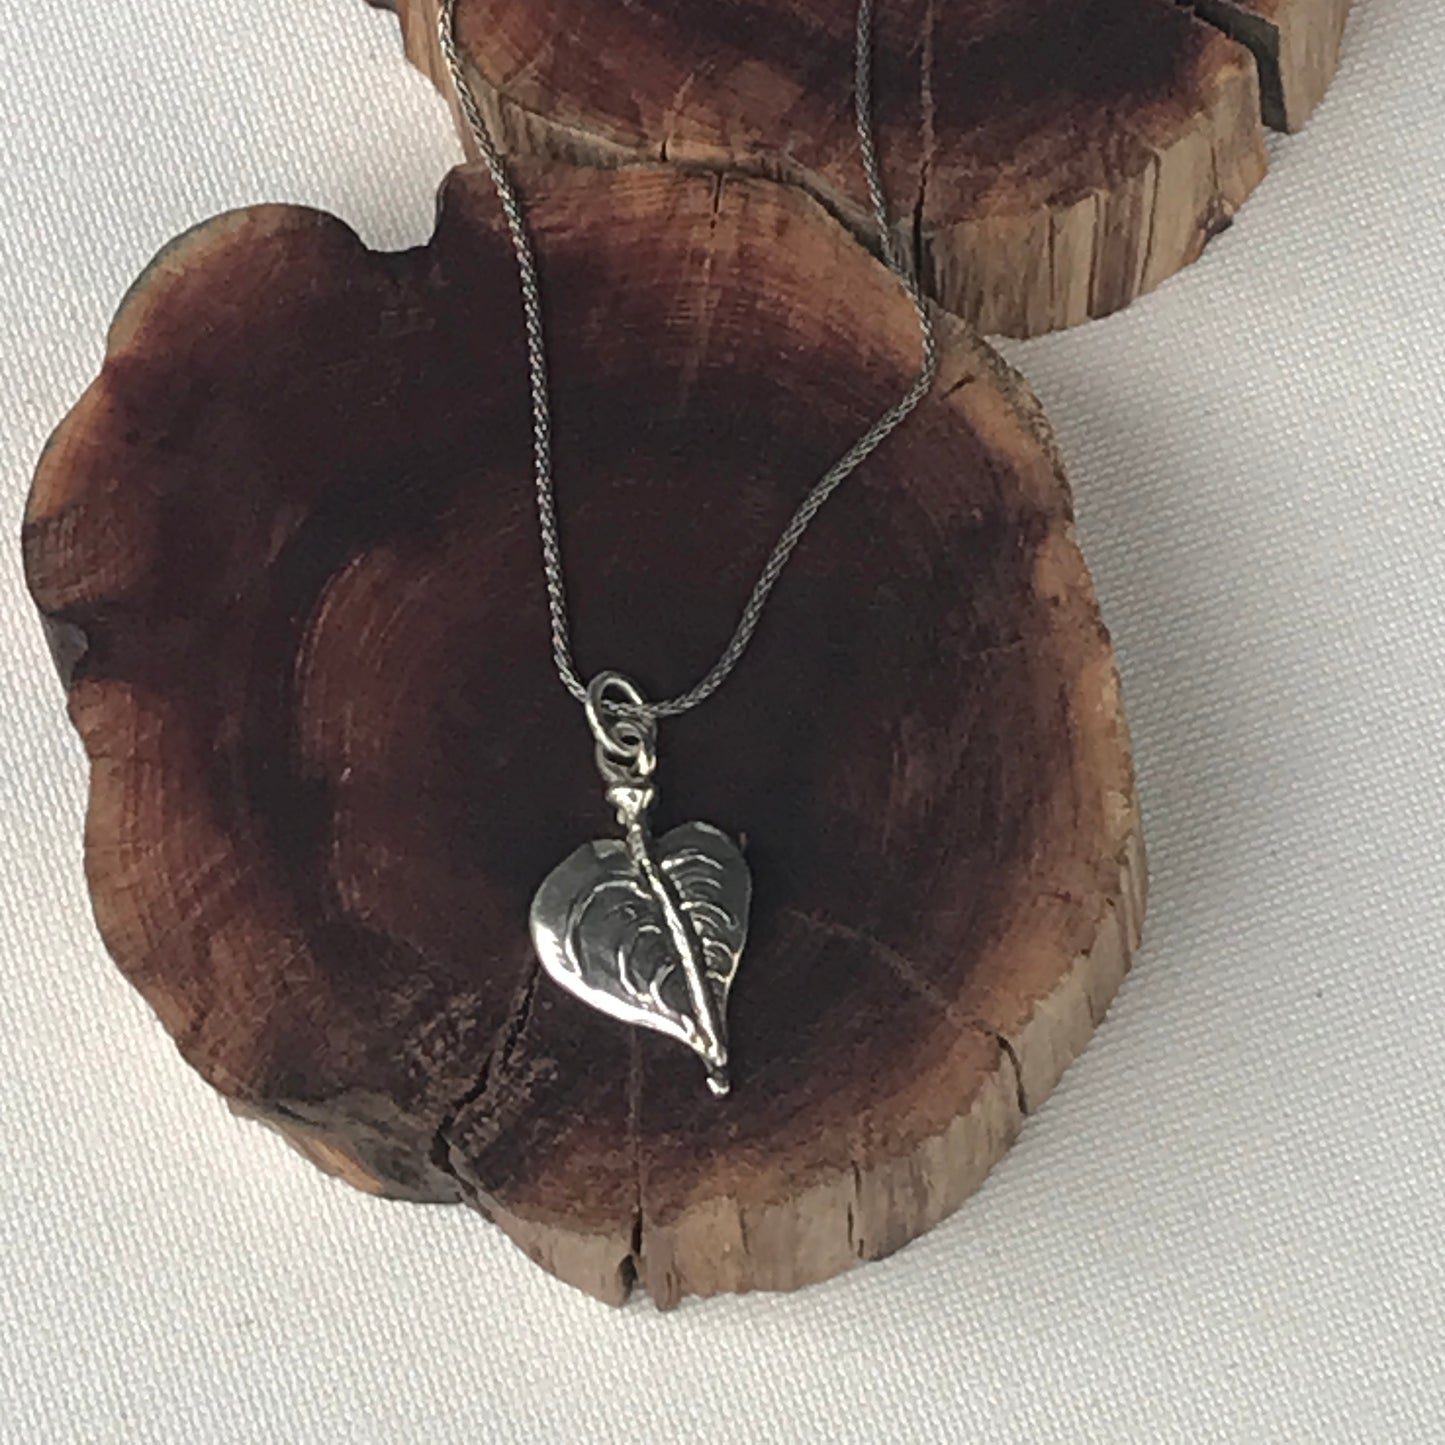 Bohdi leaf necklace Vermont donation pre-order ready in 2-3 weeks